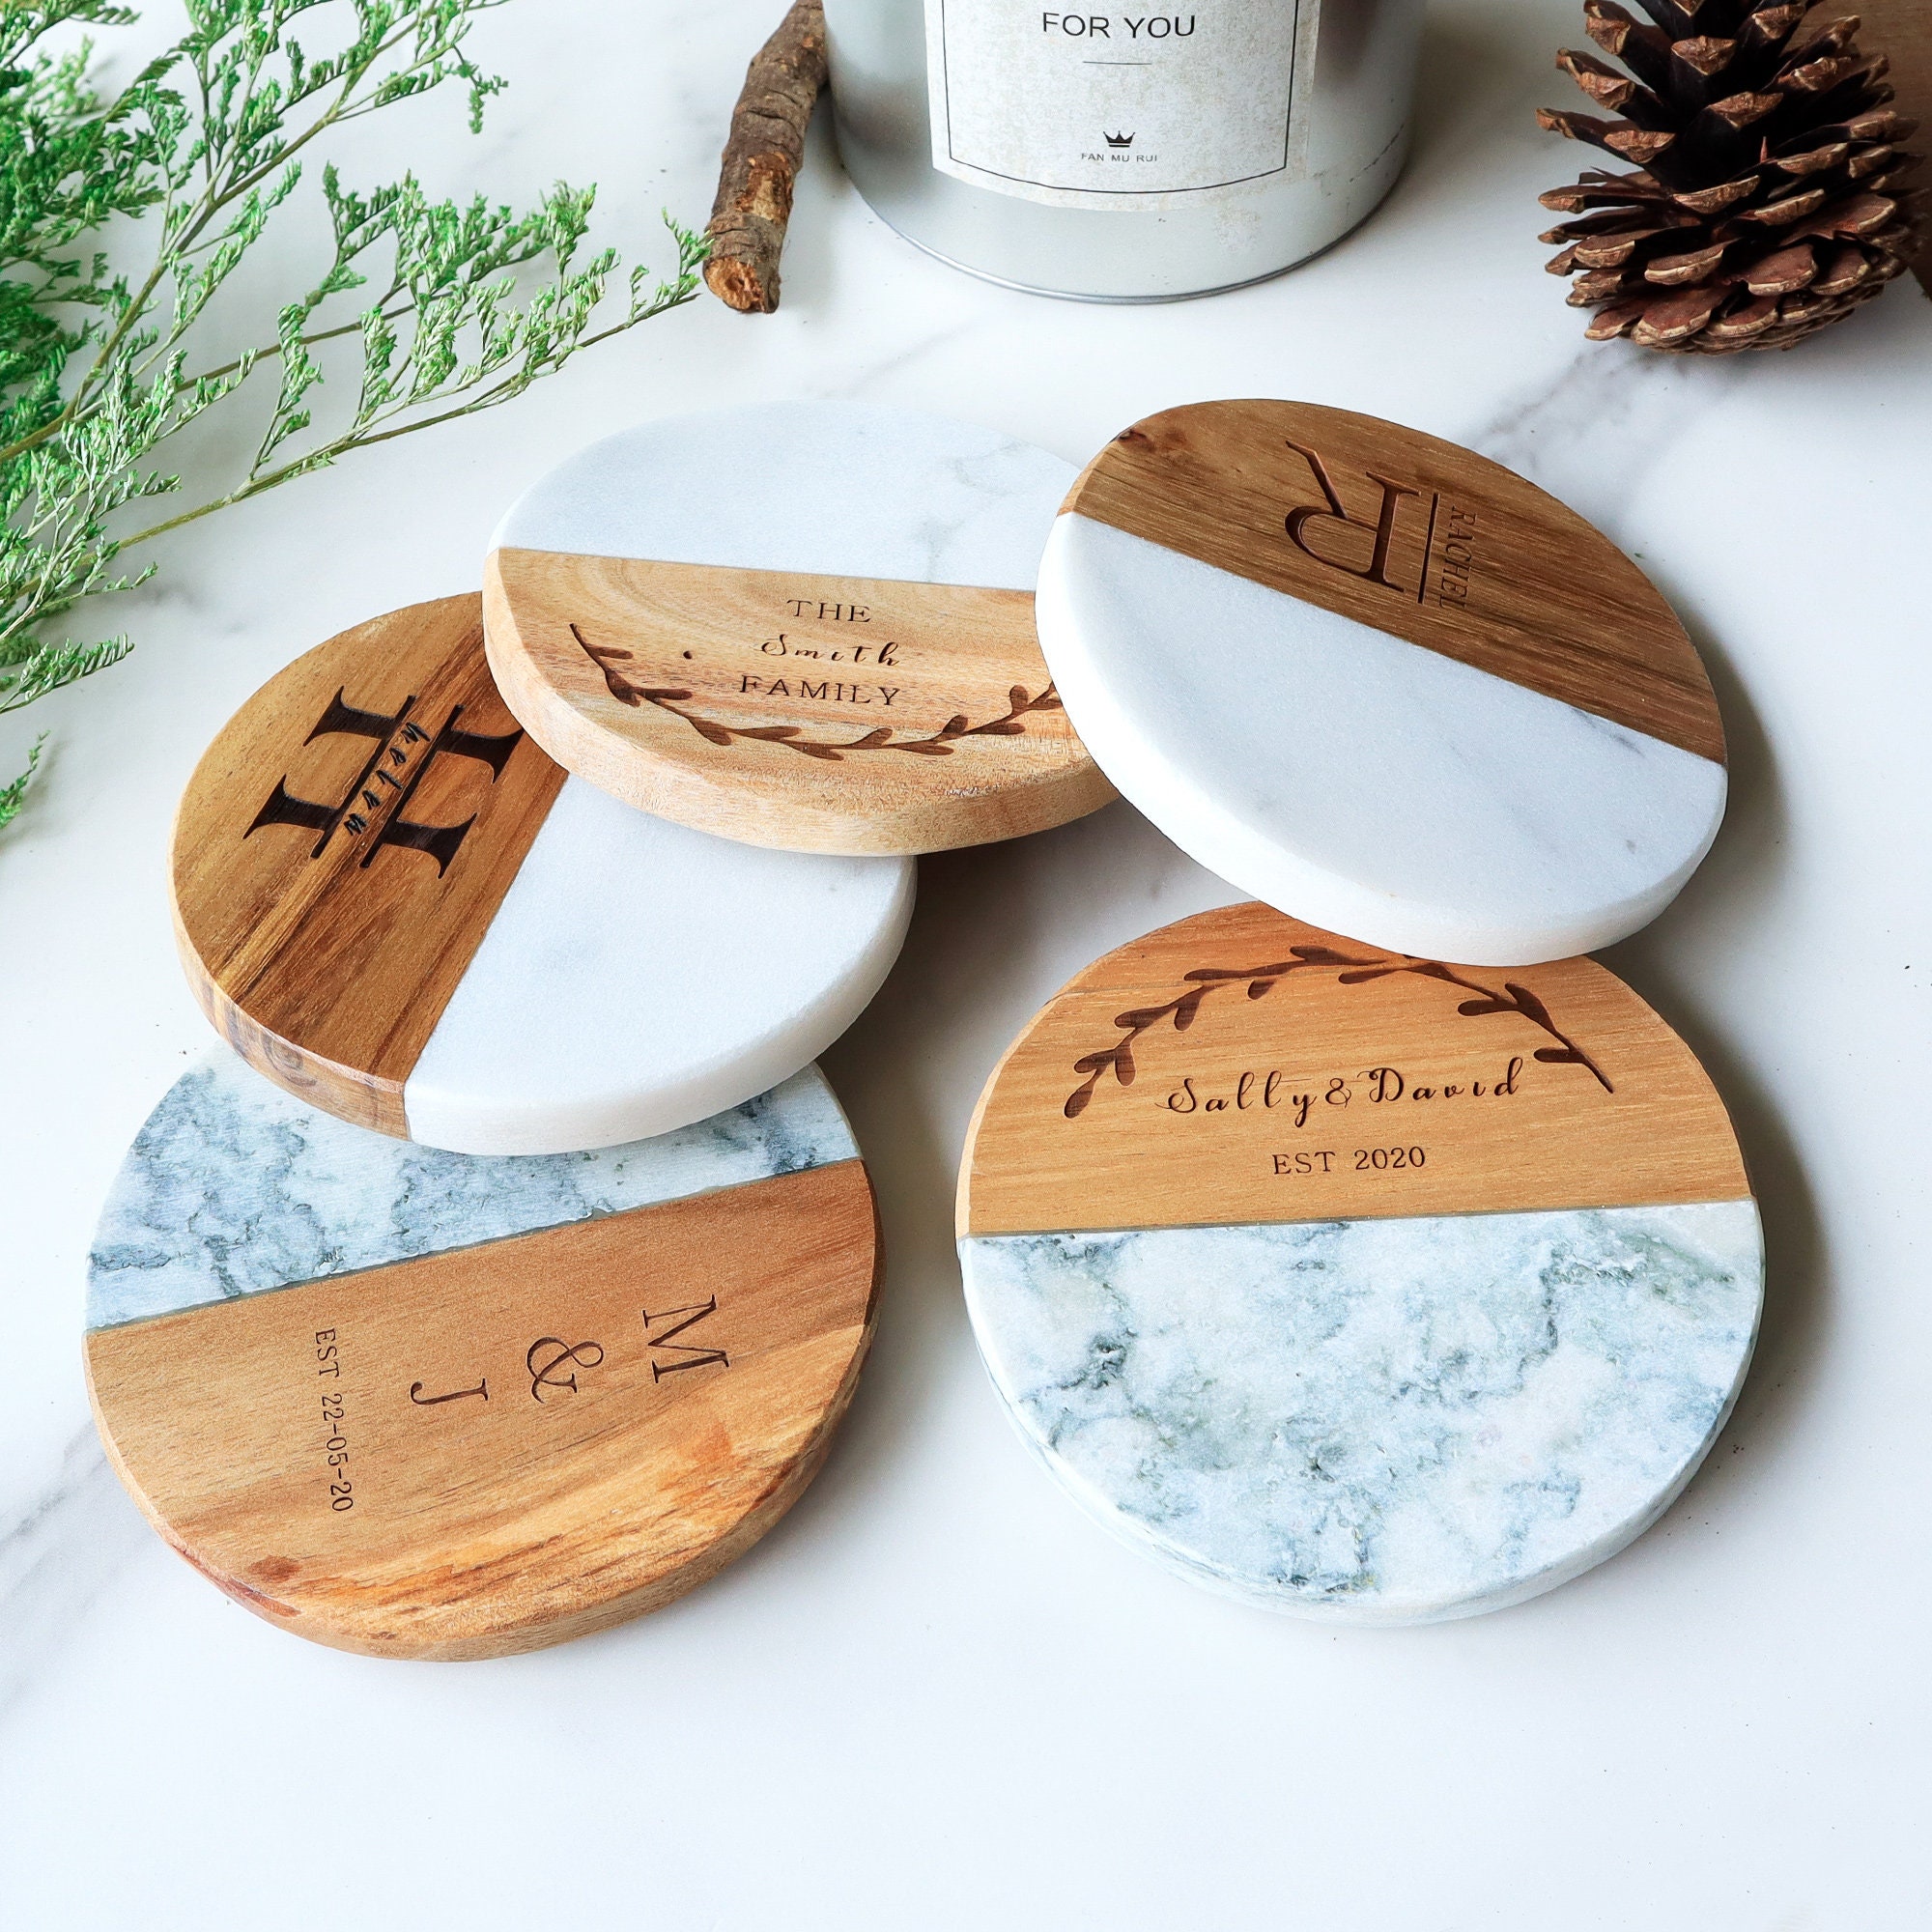  Handmade Blank Marble Coasters - Square Wooden